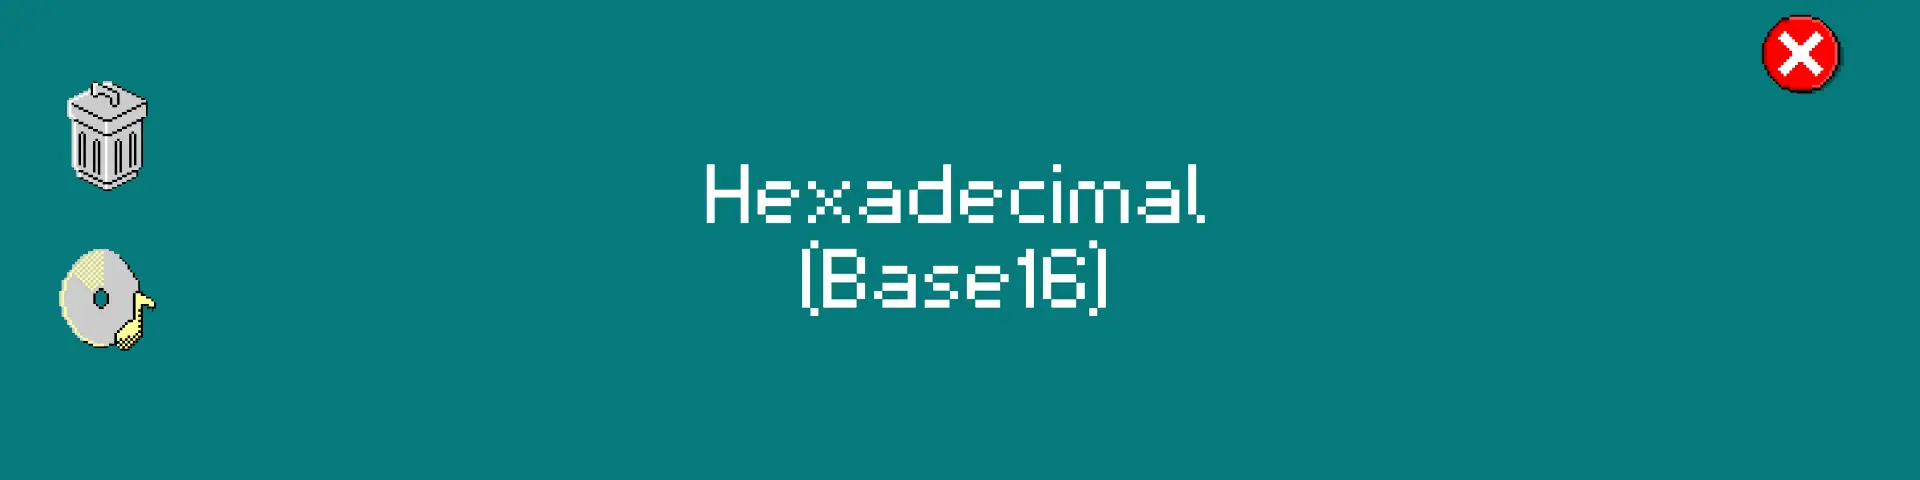 In this article, we will cover the fundamentals of Hexadecimal (aka Base16): what it is, how it works, and how to convert text to Base16 format.